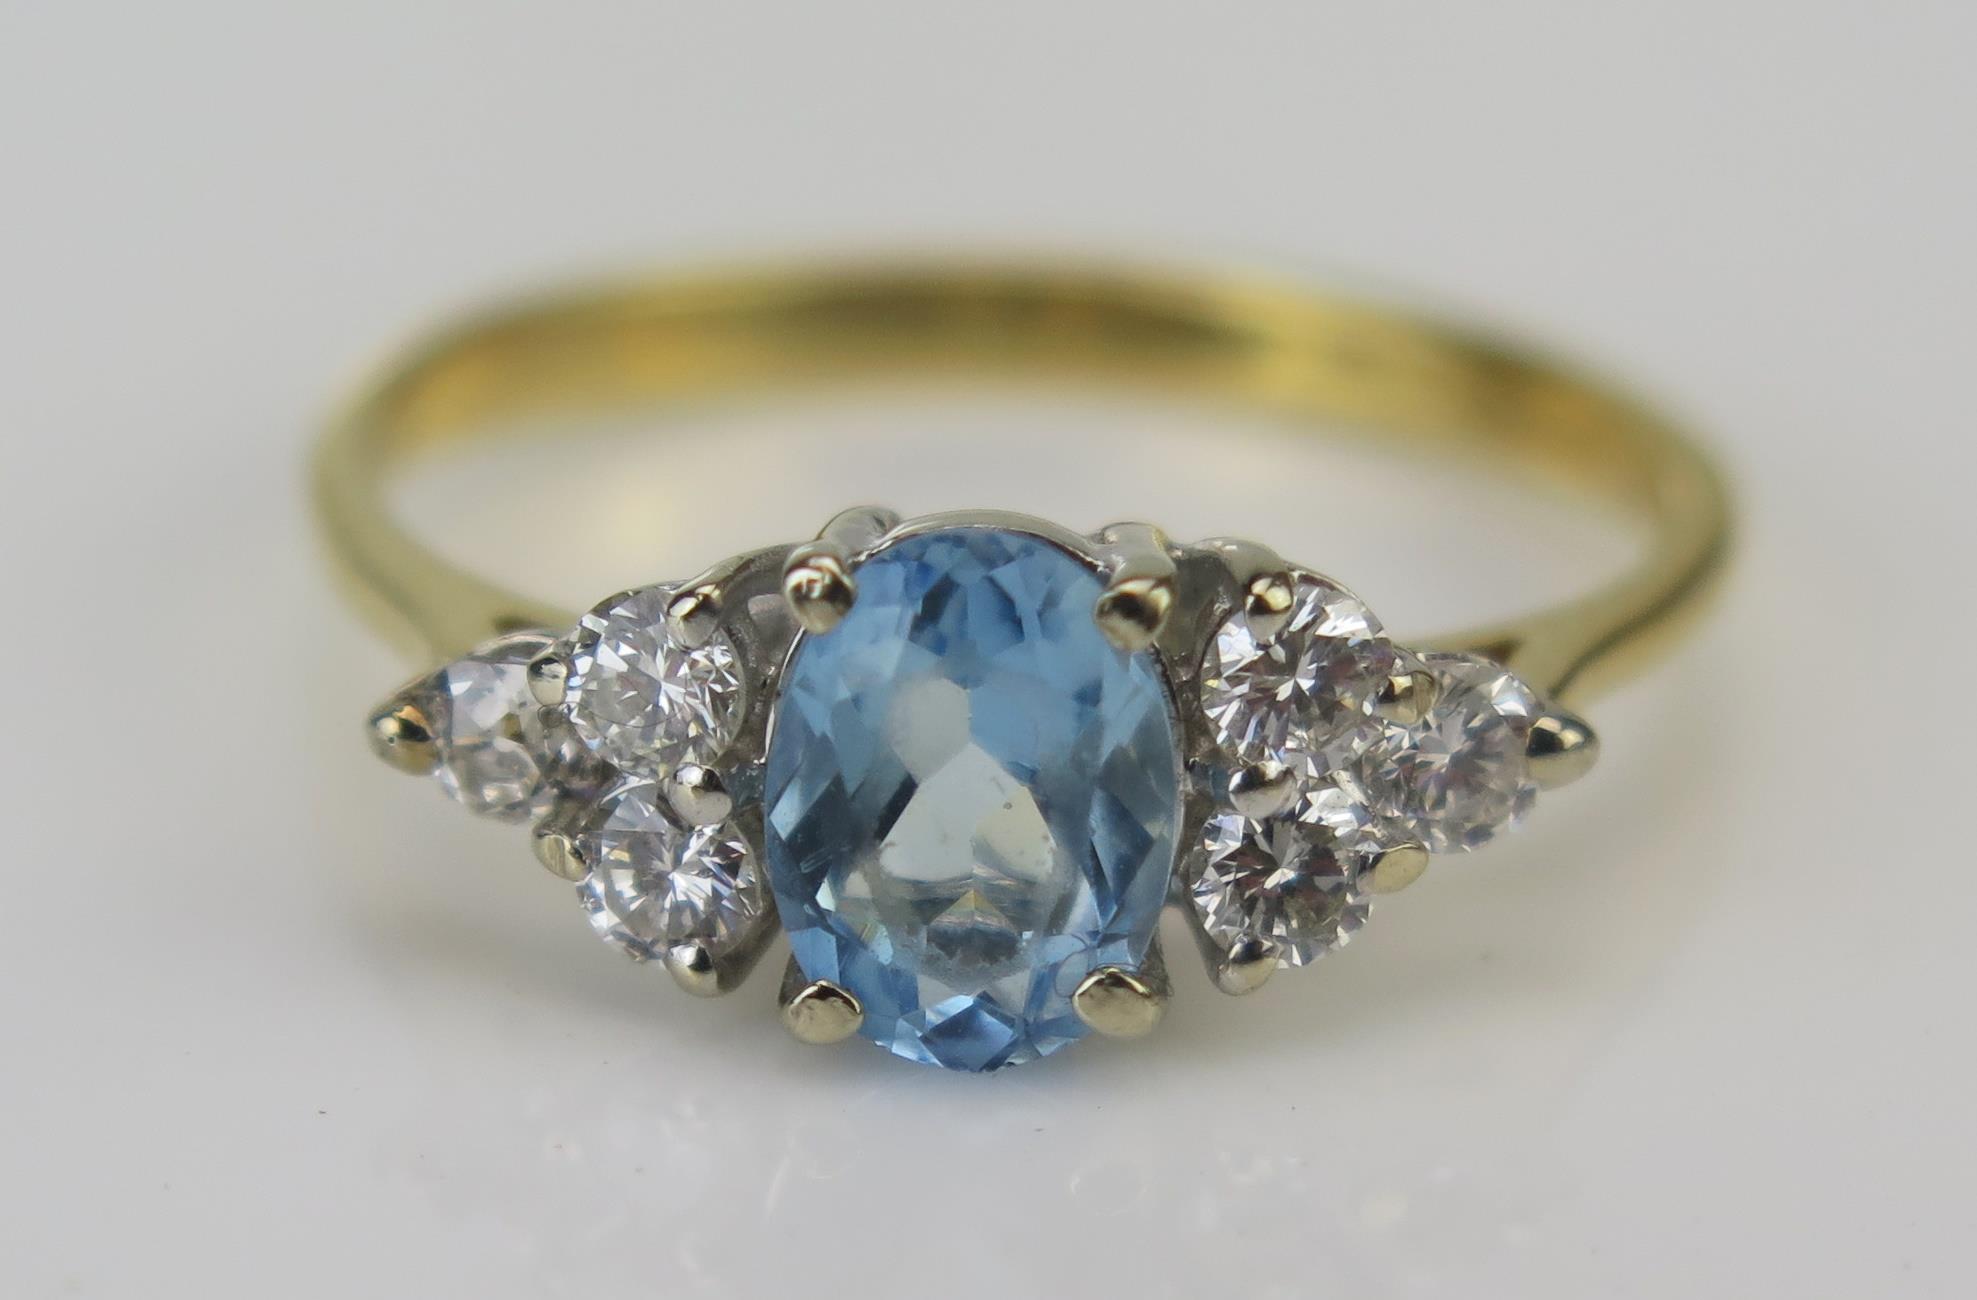 An 18ct Gold, Diamond and Blue Stone Ring, c. 15.7x7mm head, stamped 750 with London import marks,